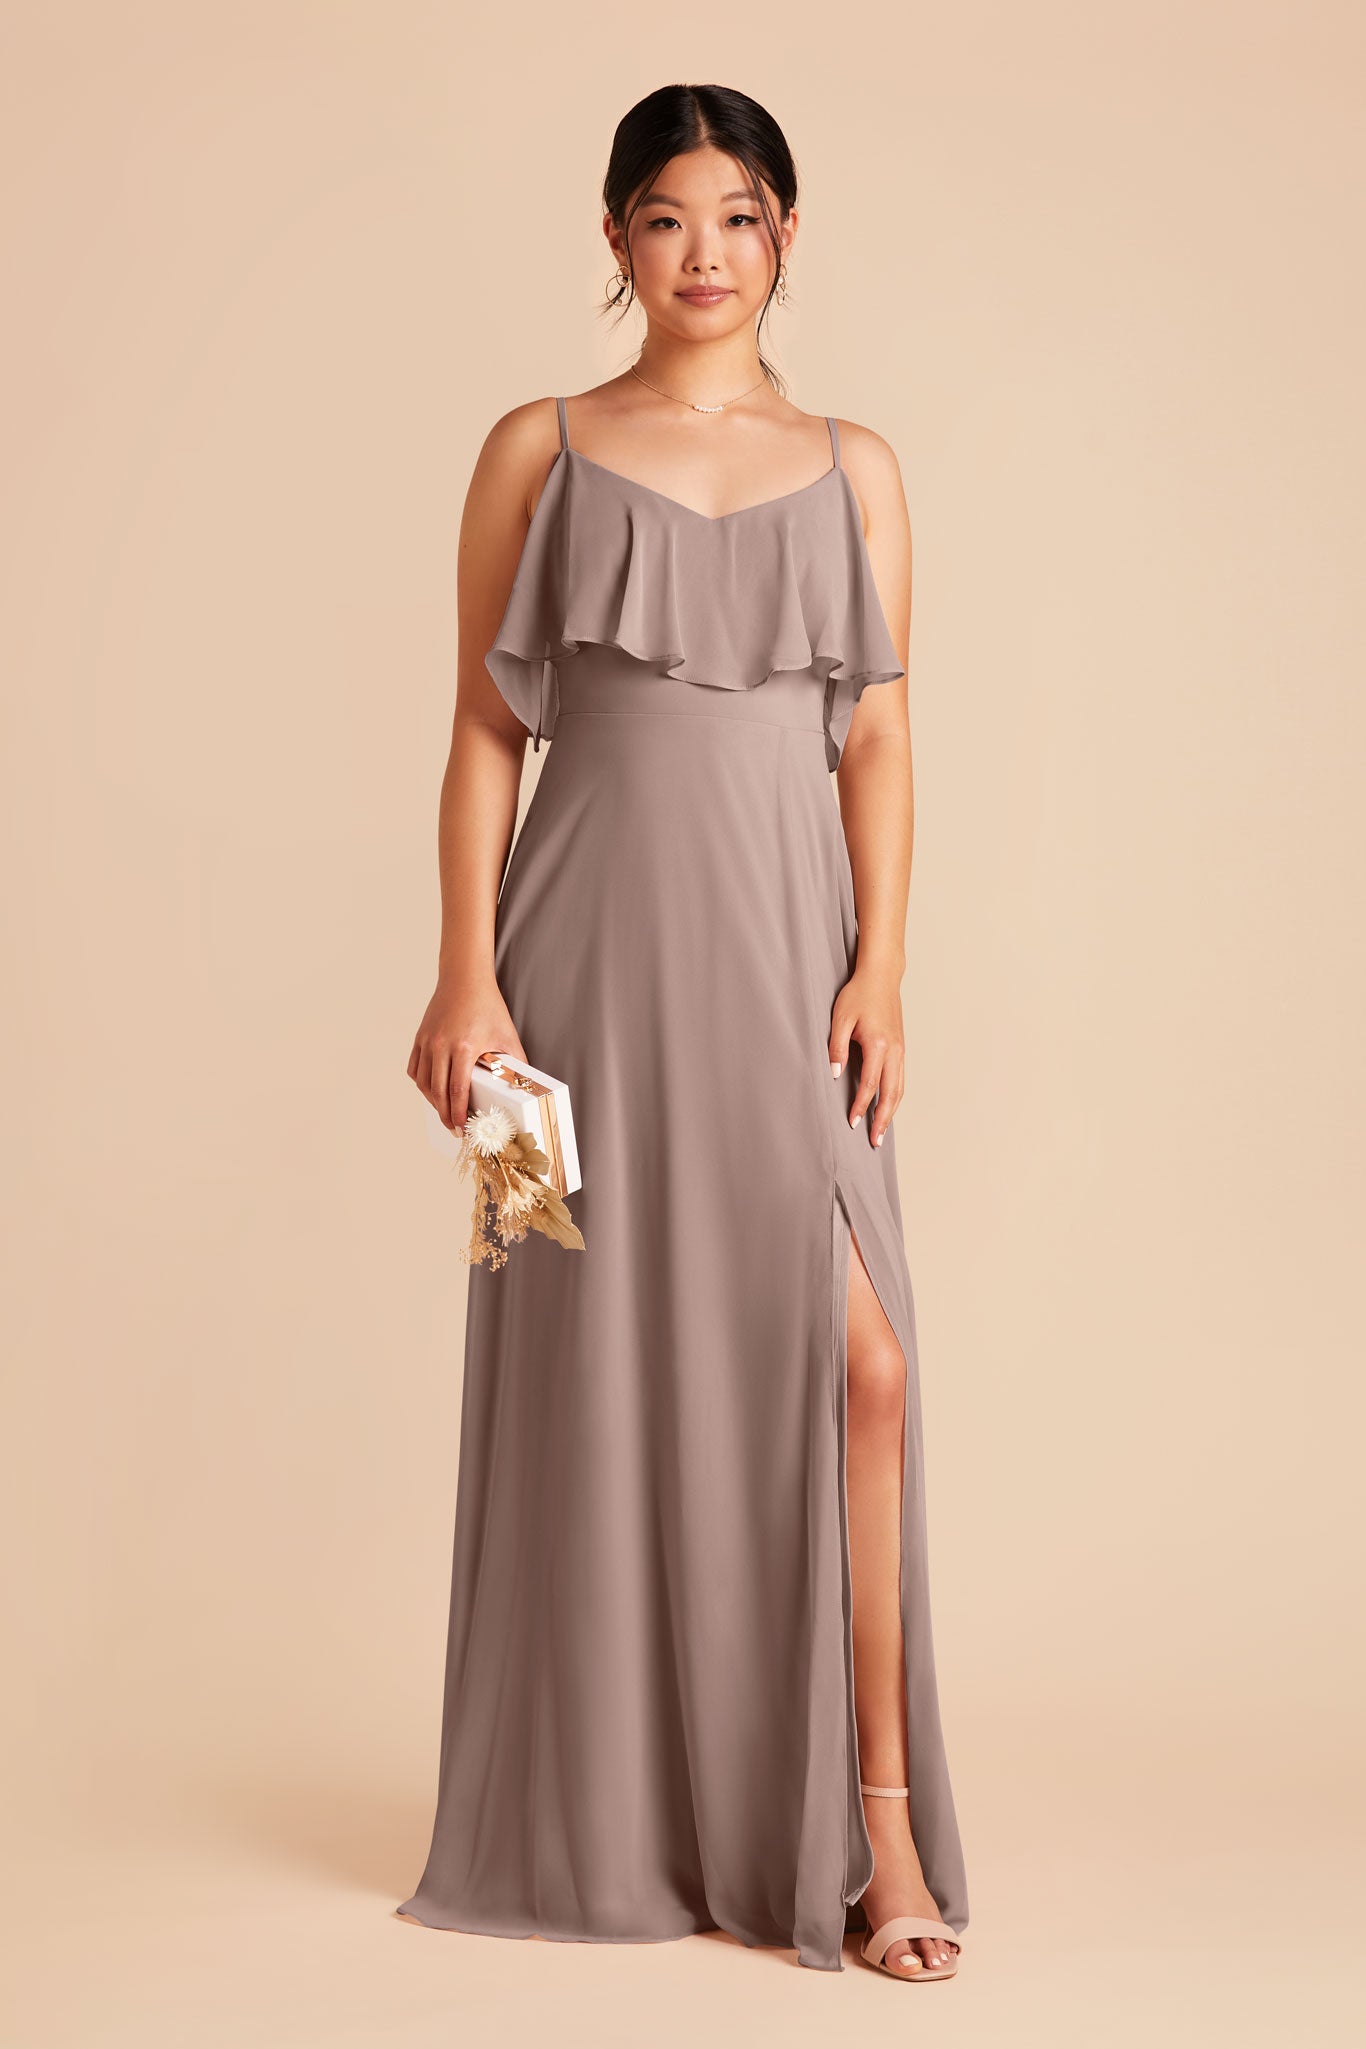 Toffee Jane Convertible Dress by Birdy Grey